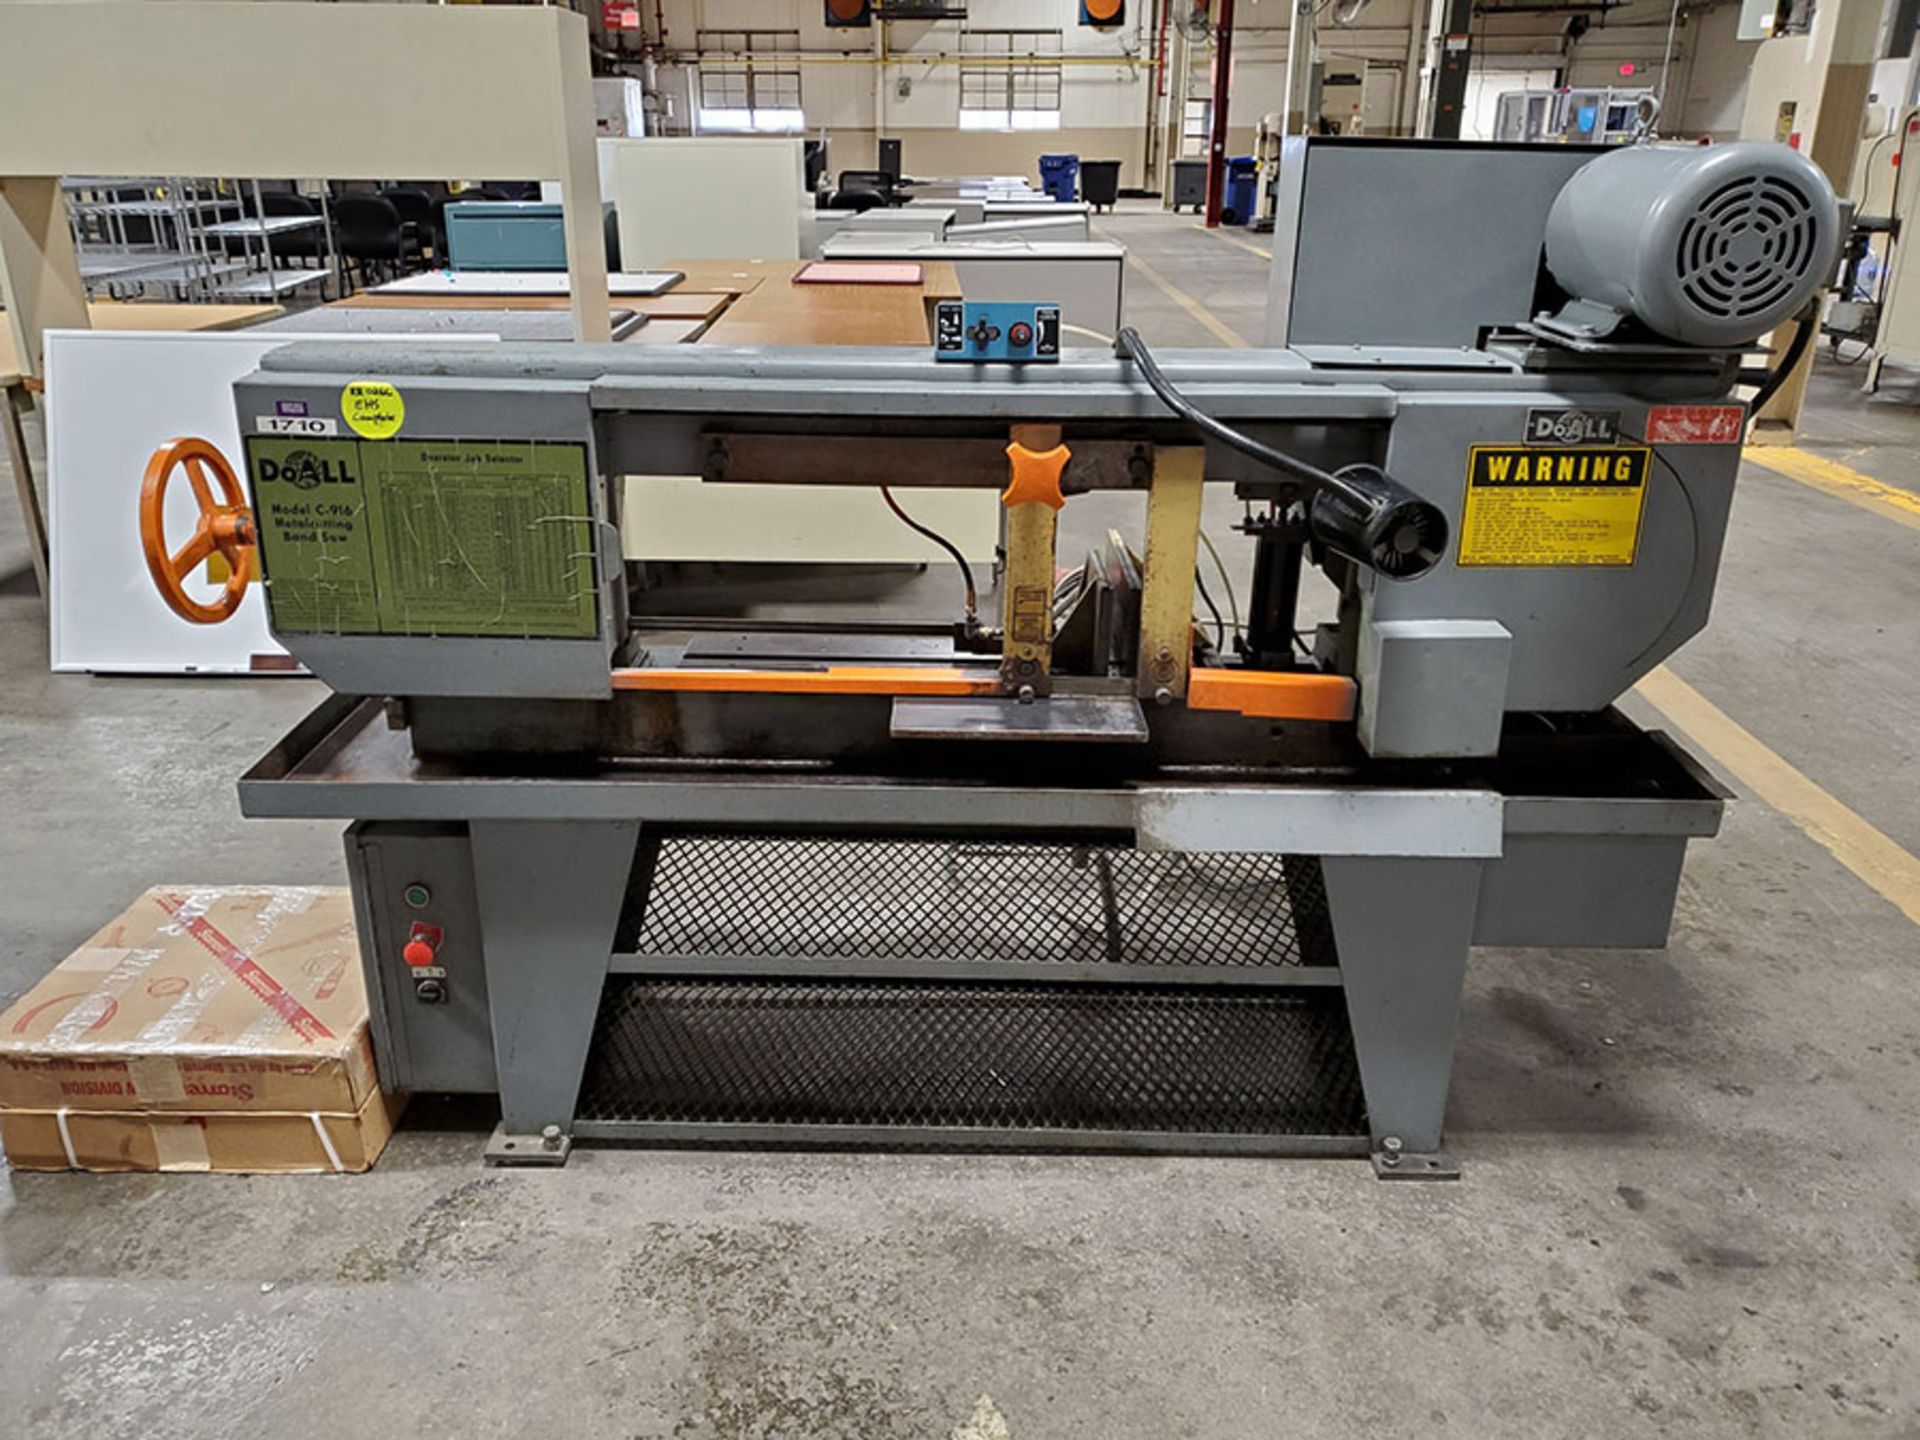 DO-ALL MODEL C-916 BANDSAW METAL CUTTING; MODEL C-915, S/N 438-882018, 3-PHASE, 3.0 NORMAL AMPS,